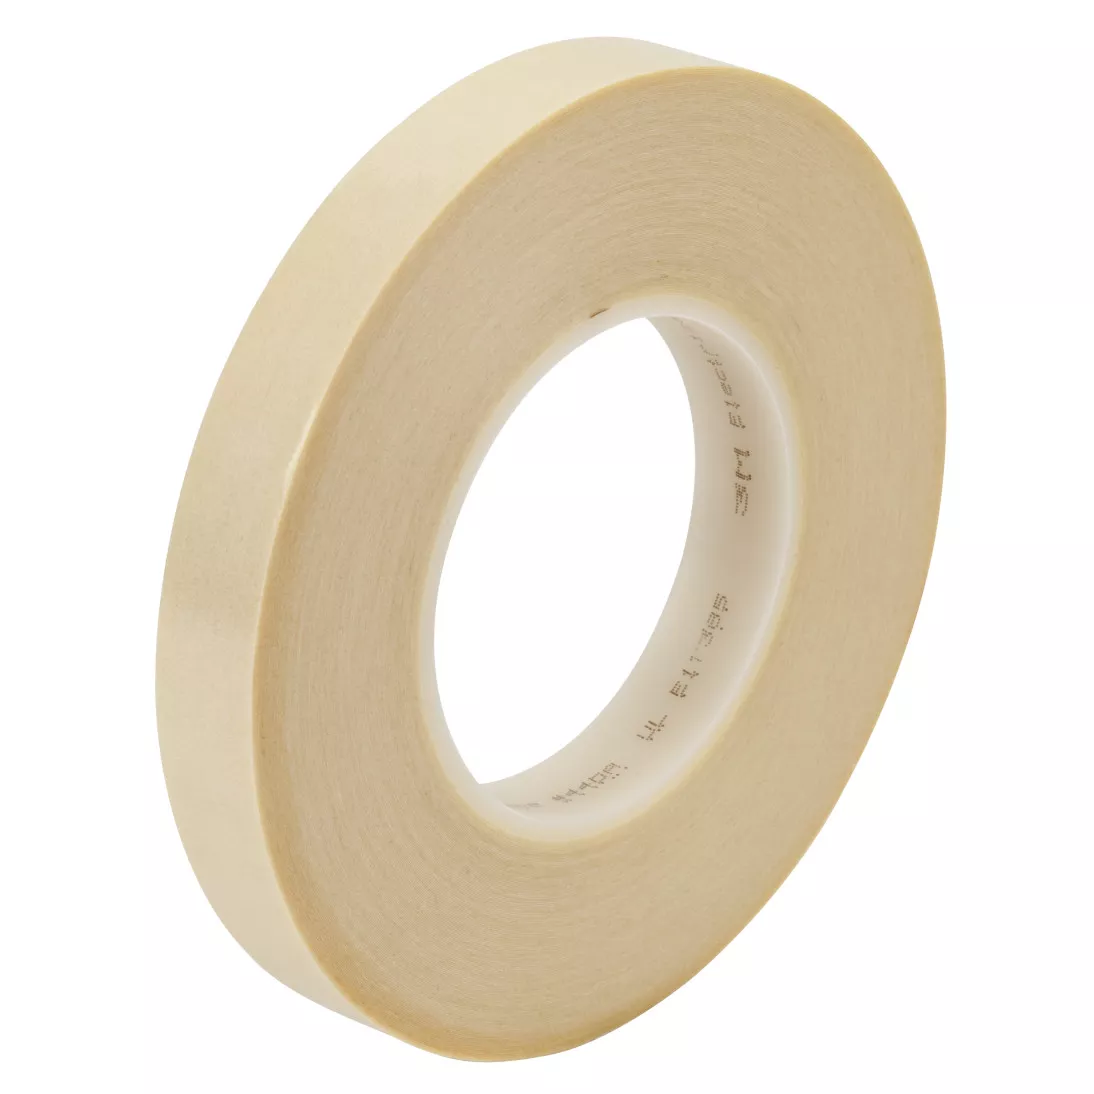 Filament Reinforced Tapes